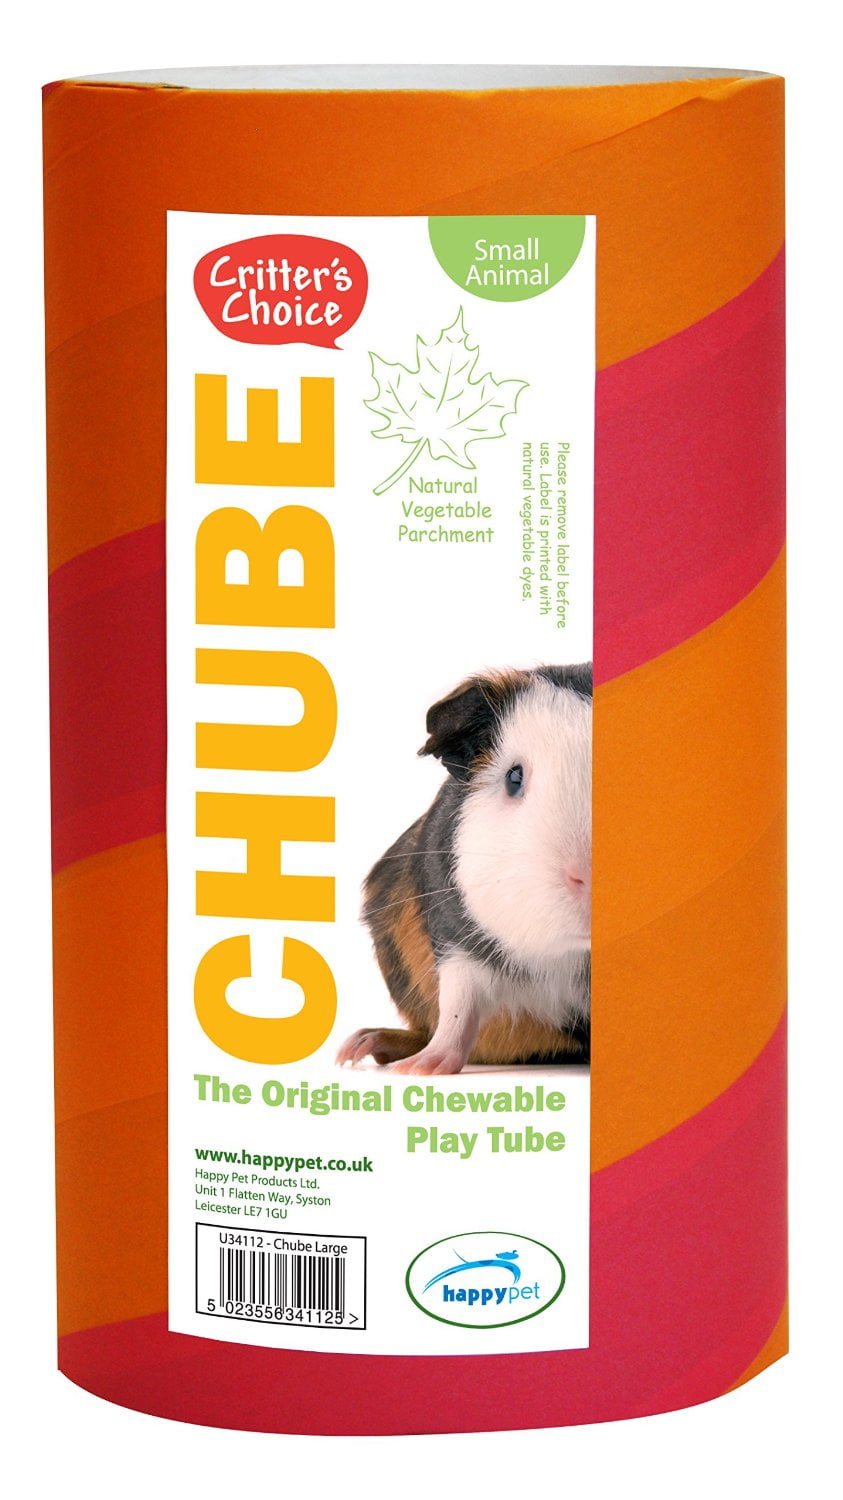 Chewable Play Tube for Small Animals - PetWorld